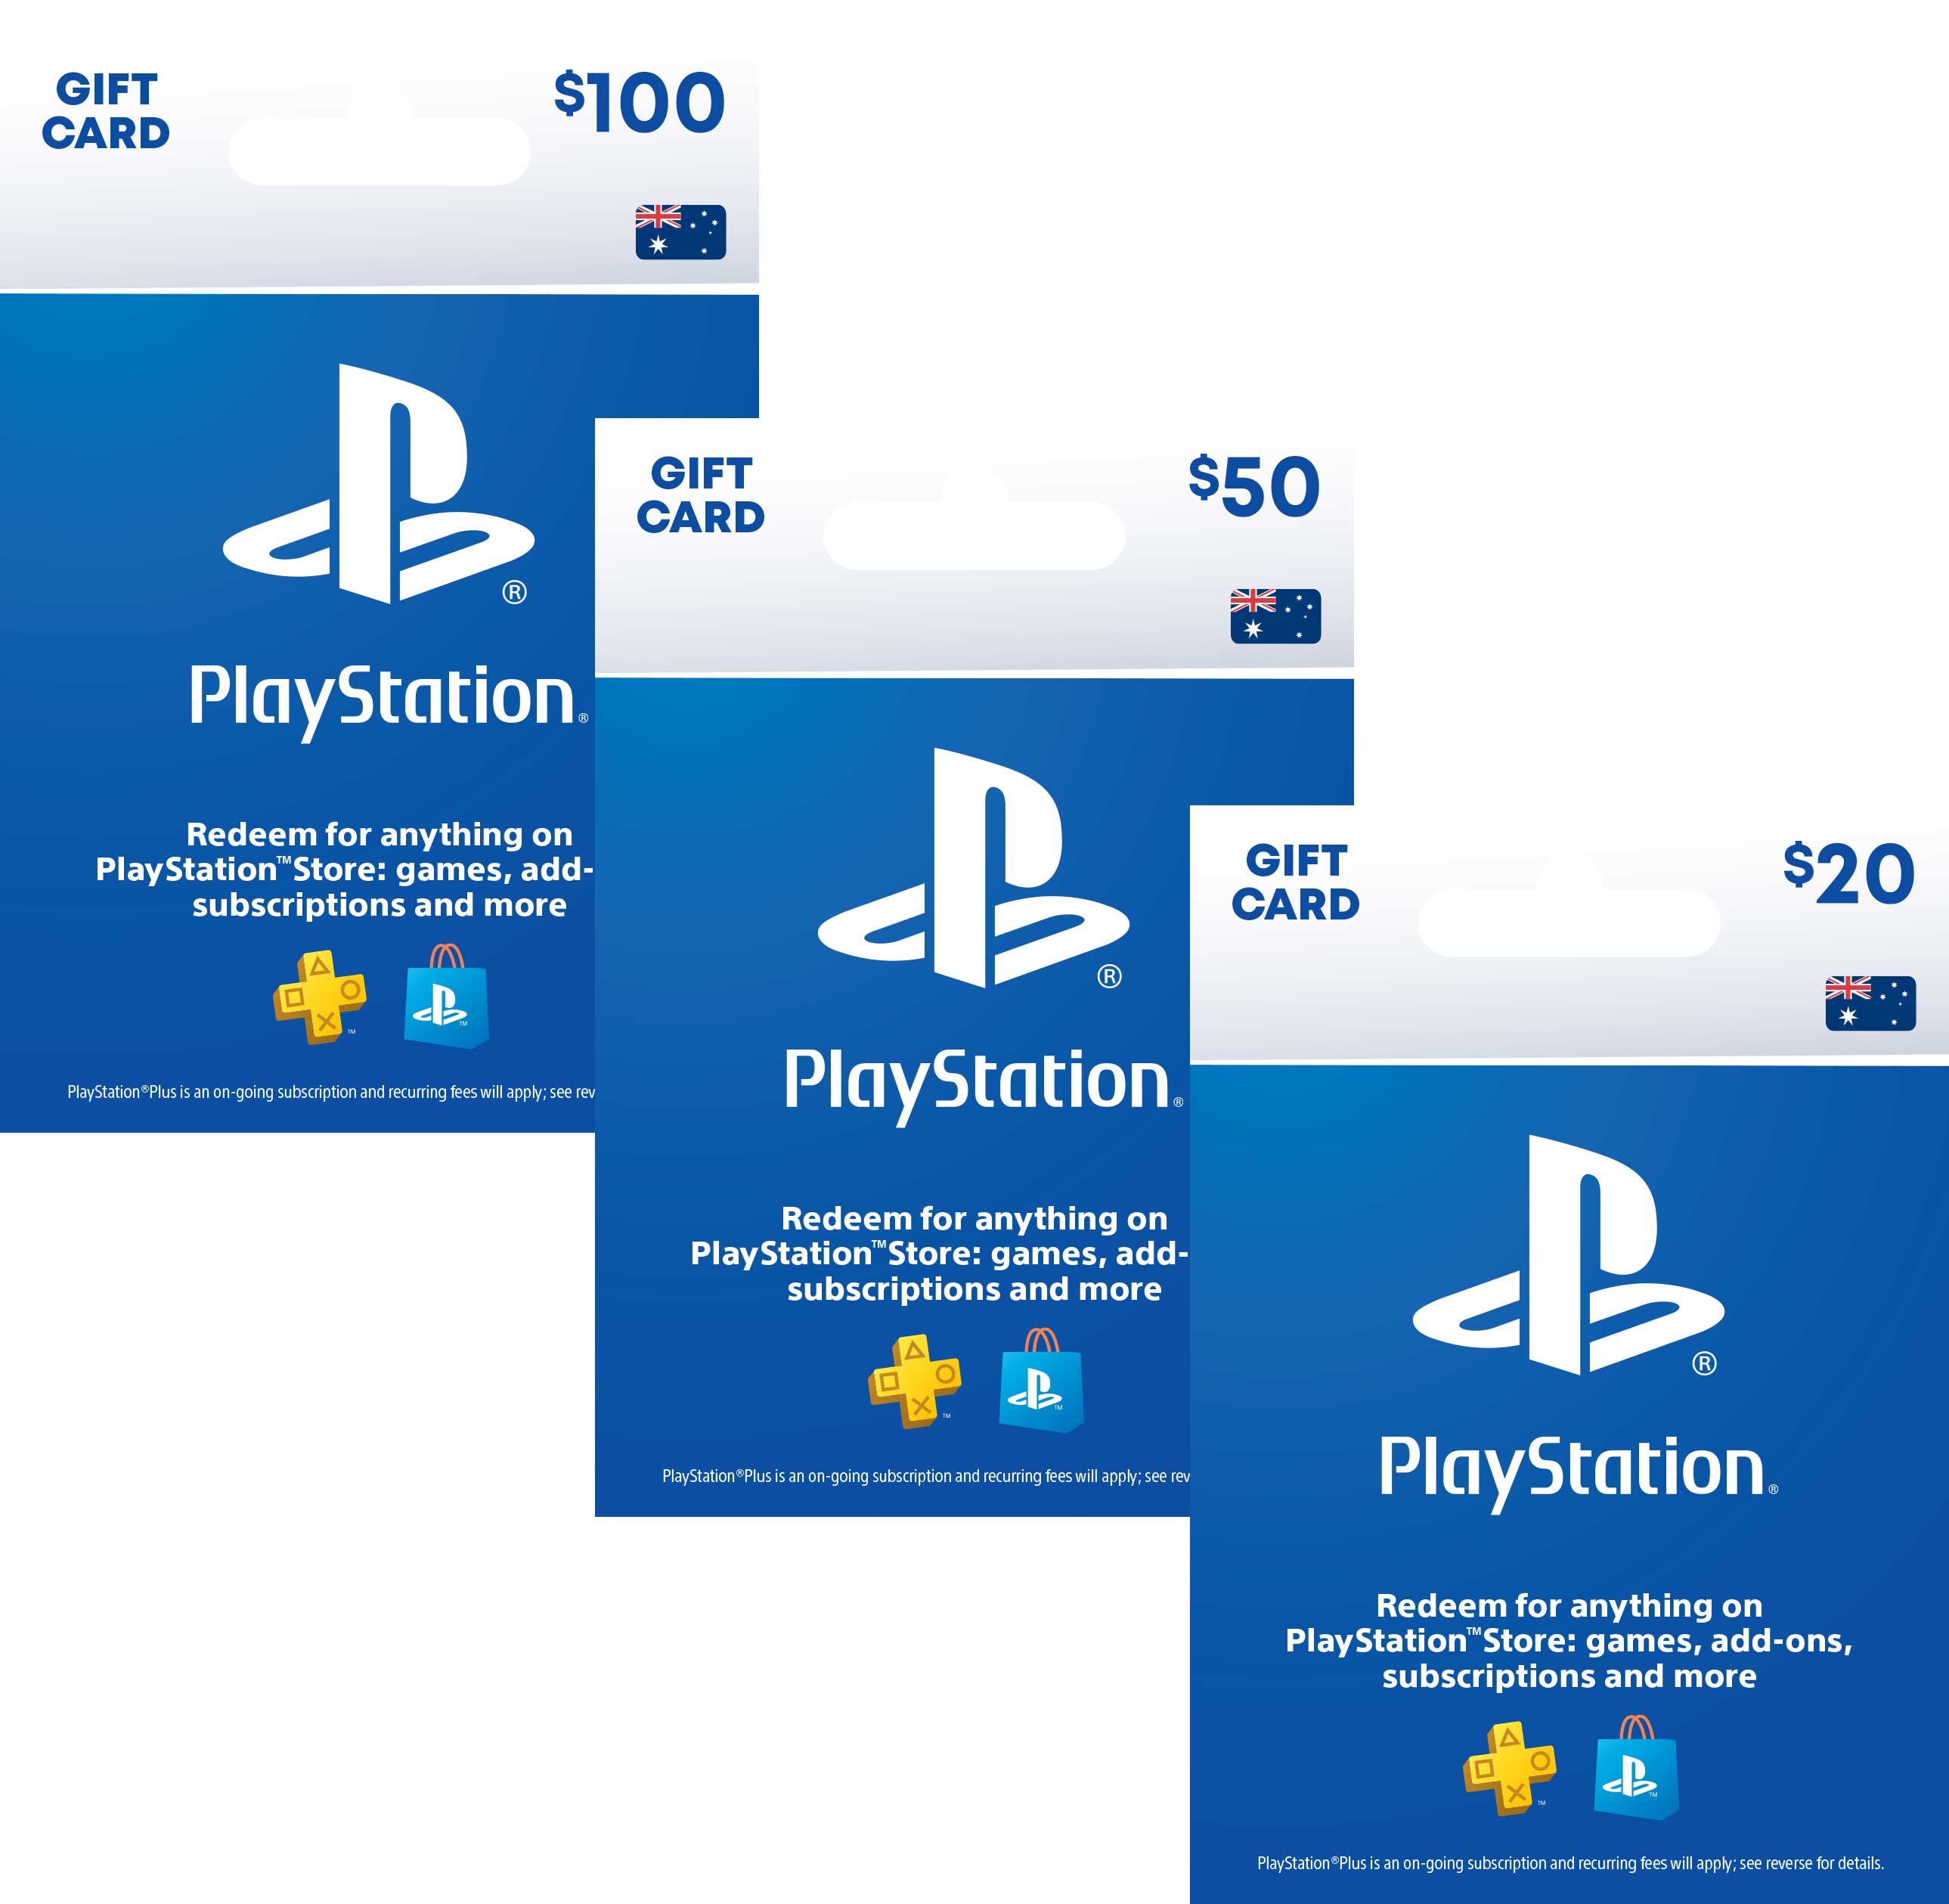 Essential Picks promotion comes to PlayStation Store – PlayStation